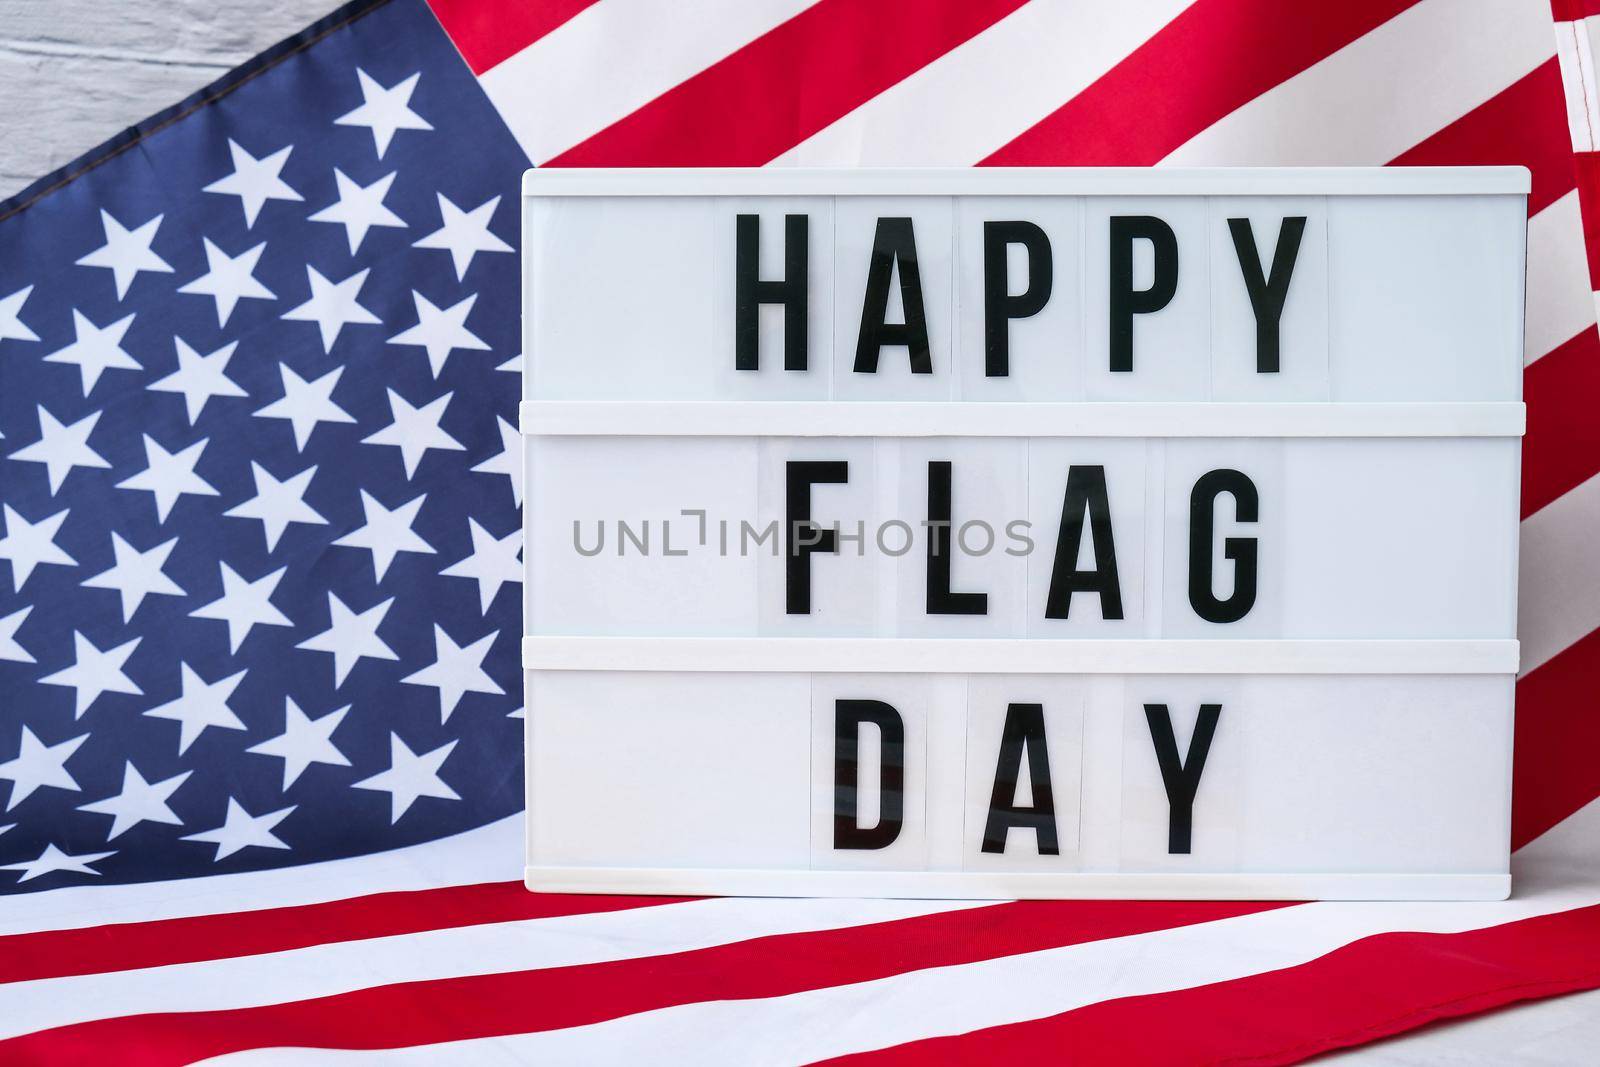 American flag. Lightbox with text HAPPY FLAG DAY Flag of the united states of America. July 4th Independence Day. USA patriotism national holiday. Usa proud. Freedom concept